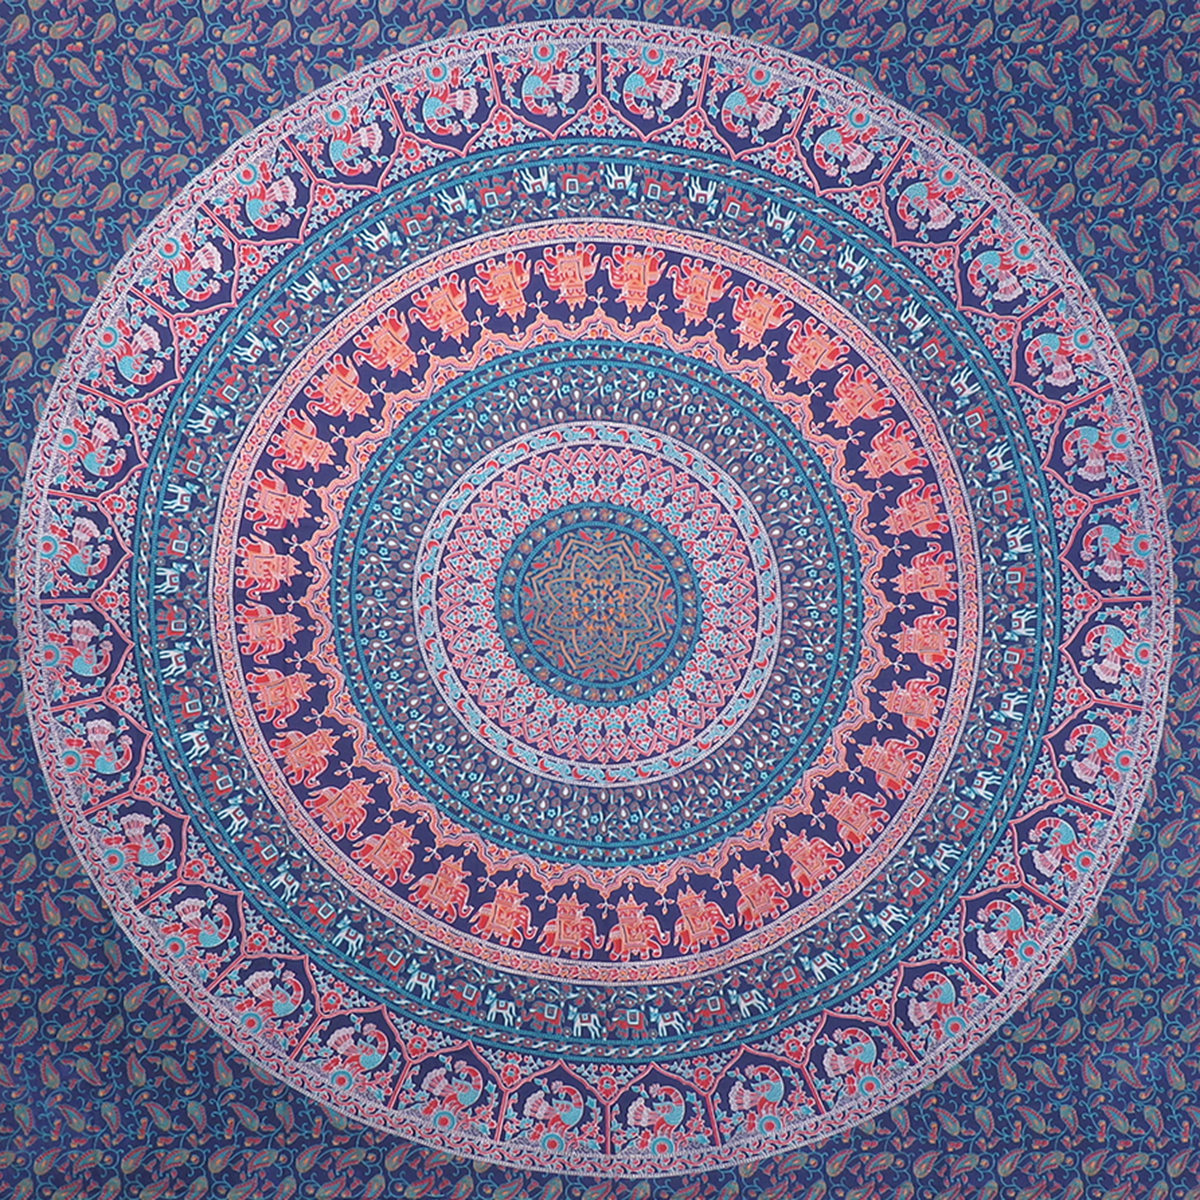 Find 230x180cm/200x150cm/150x130cm India Mandala Tapestry Wall Hanging Decor Wall Cloth Tapestries Sandy Beach Throw Rug Blanket for Sale on Gipsybee.com with cryptocurrencies